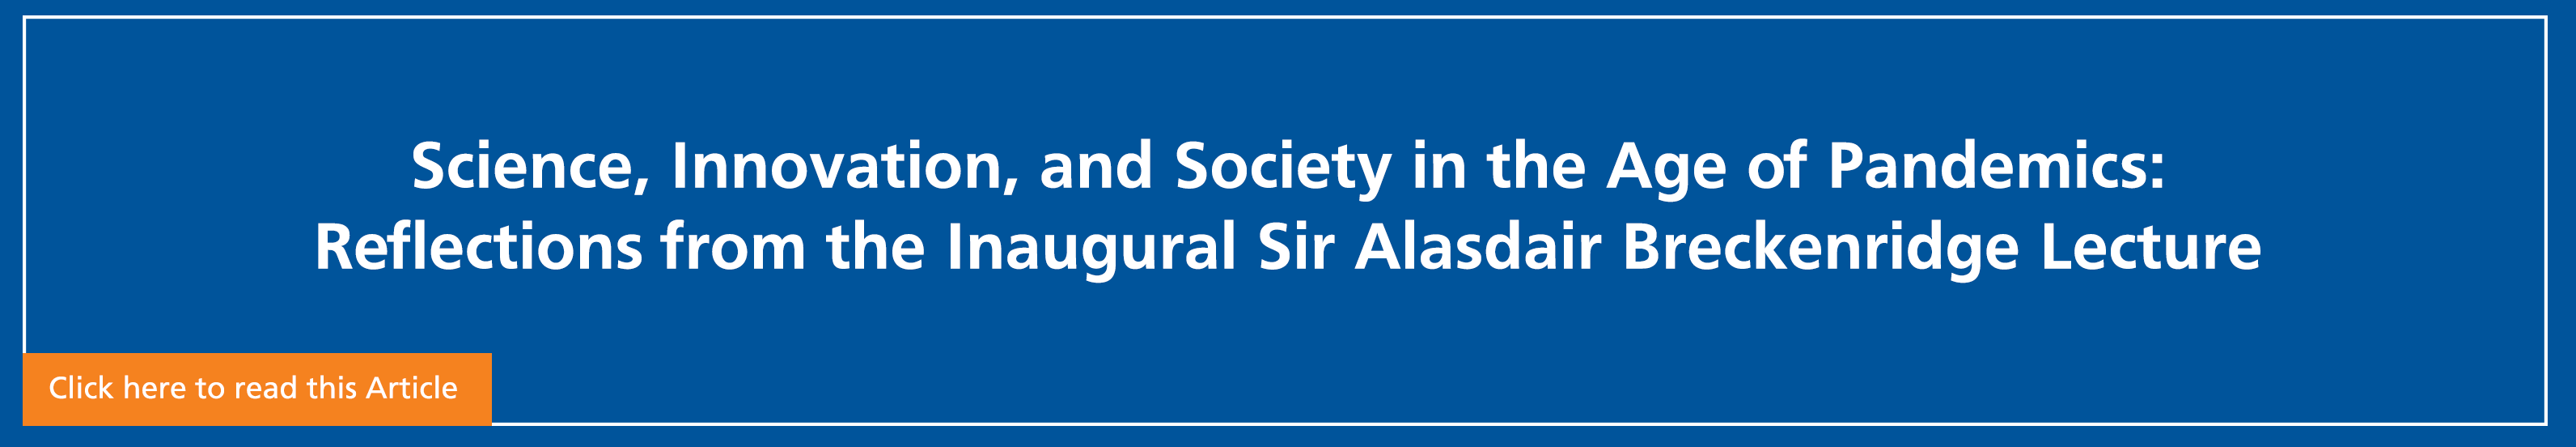 Blue banner with "Science, Innovation, and Society in the Age of Pandemics: Reflections from the Inaugural Sir Alasdair Breckenridge Lecture" in white. Click on banner to read article.